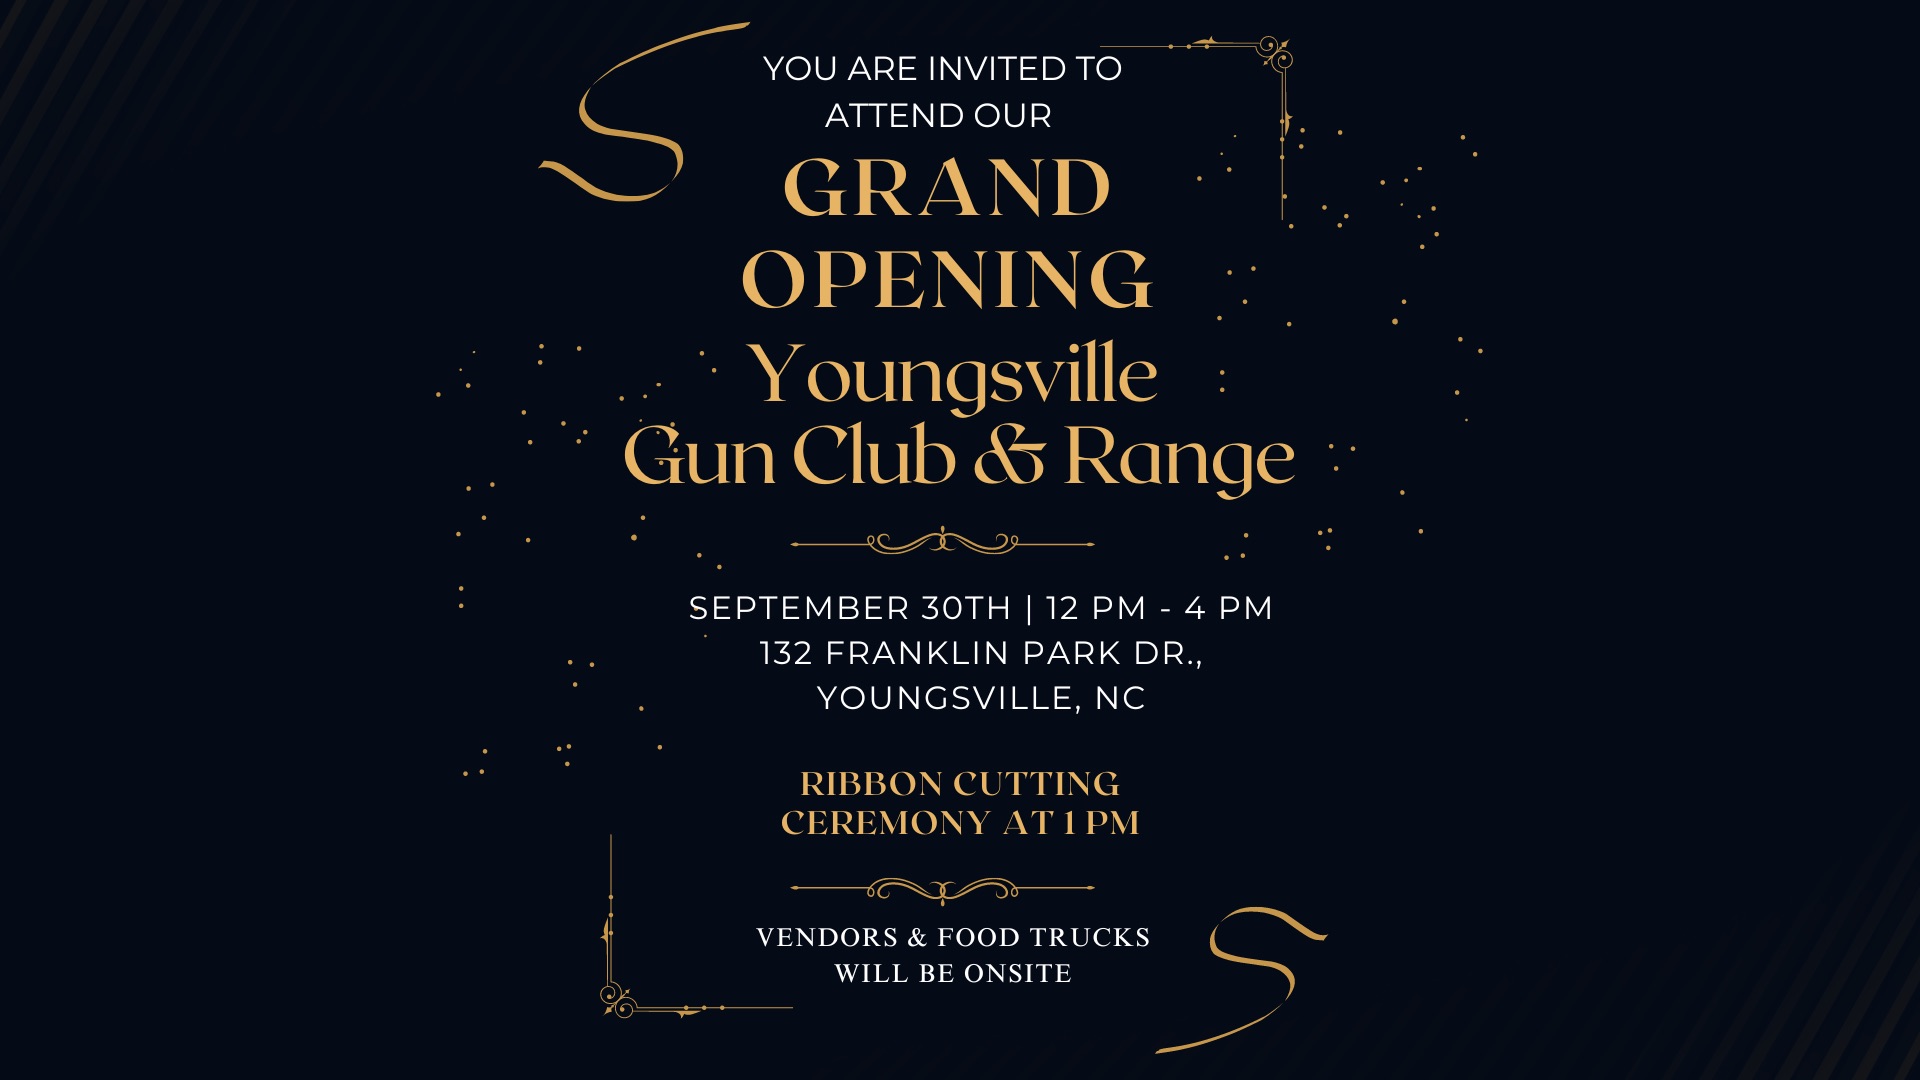 Join Us for the Grand Opening Celebration at Youngsville Gun Club and Range on September 30